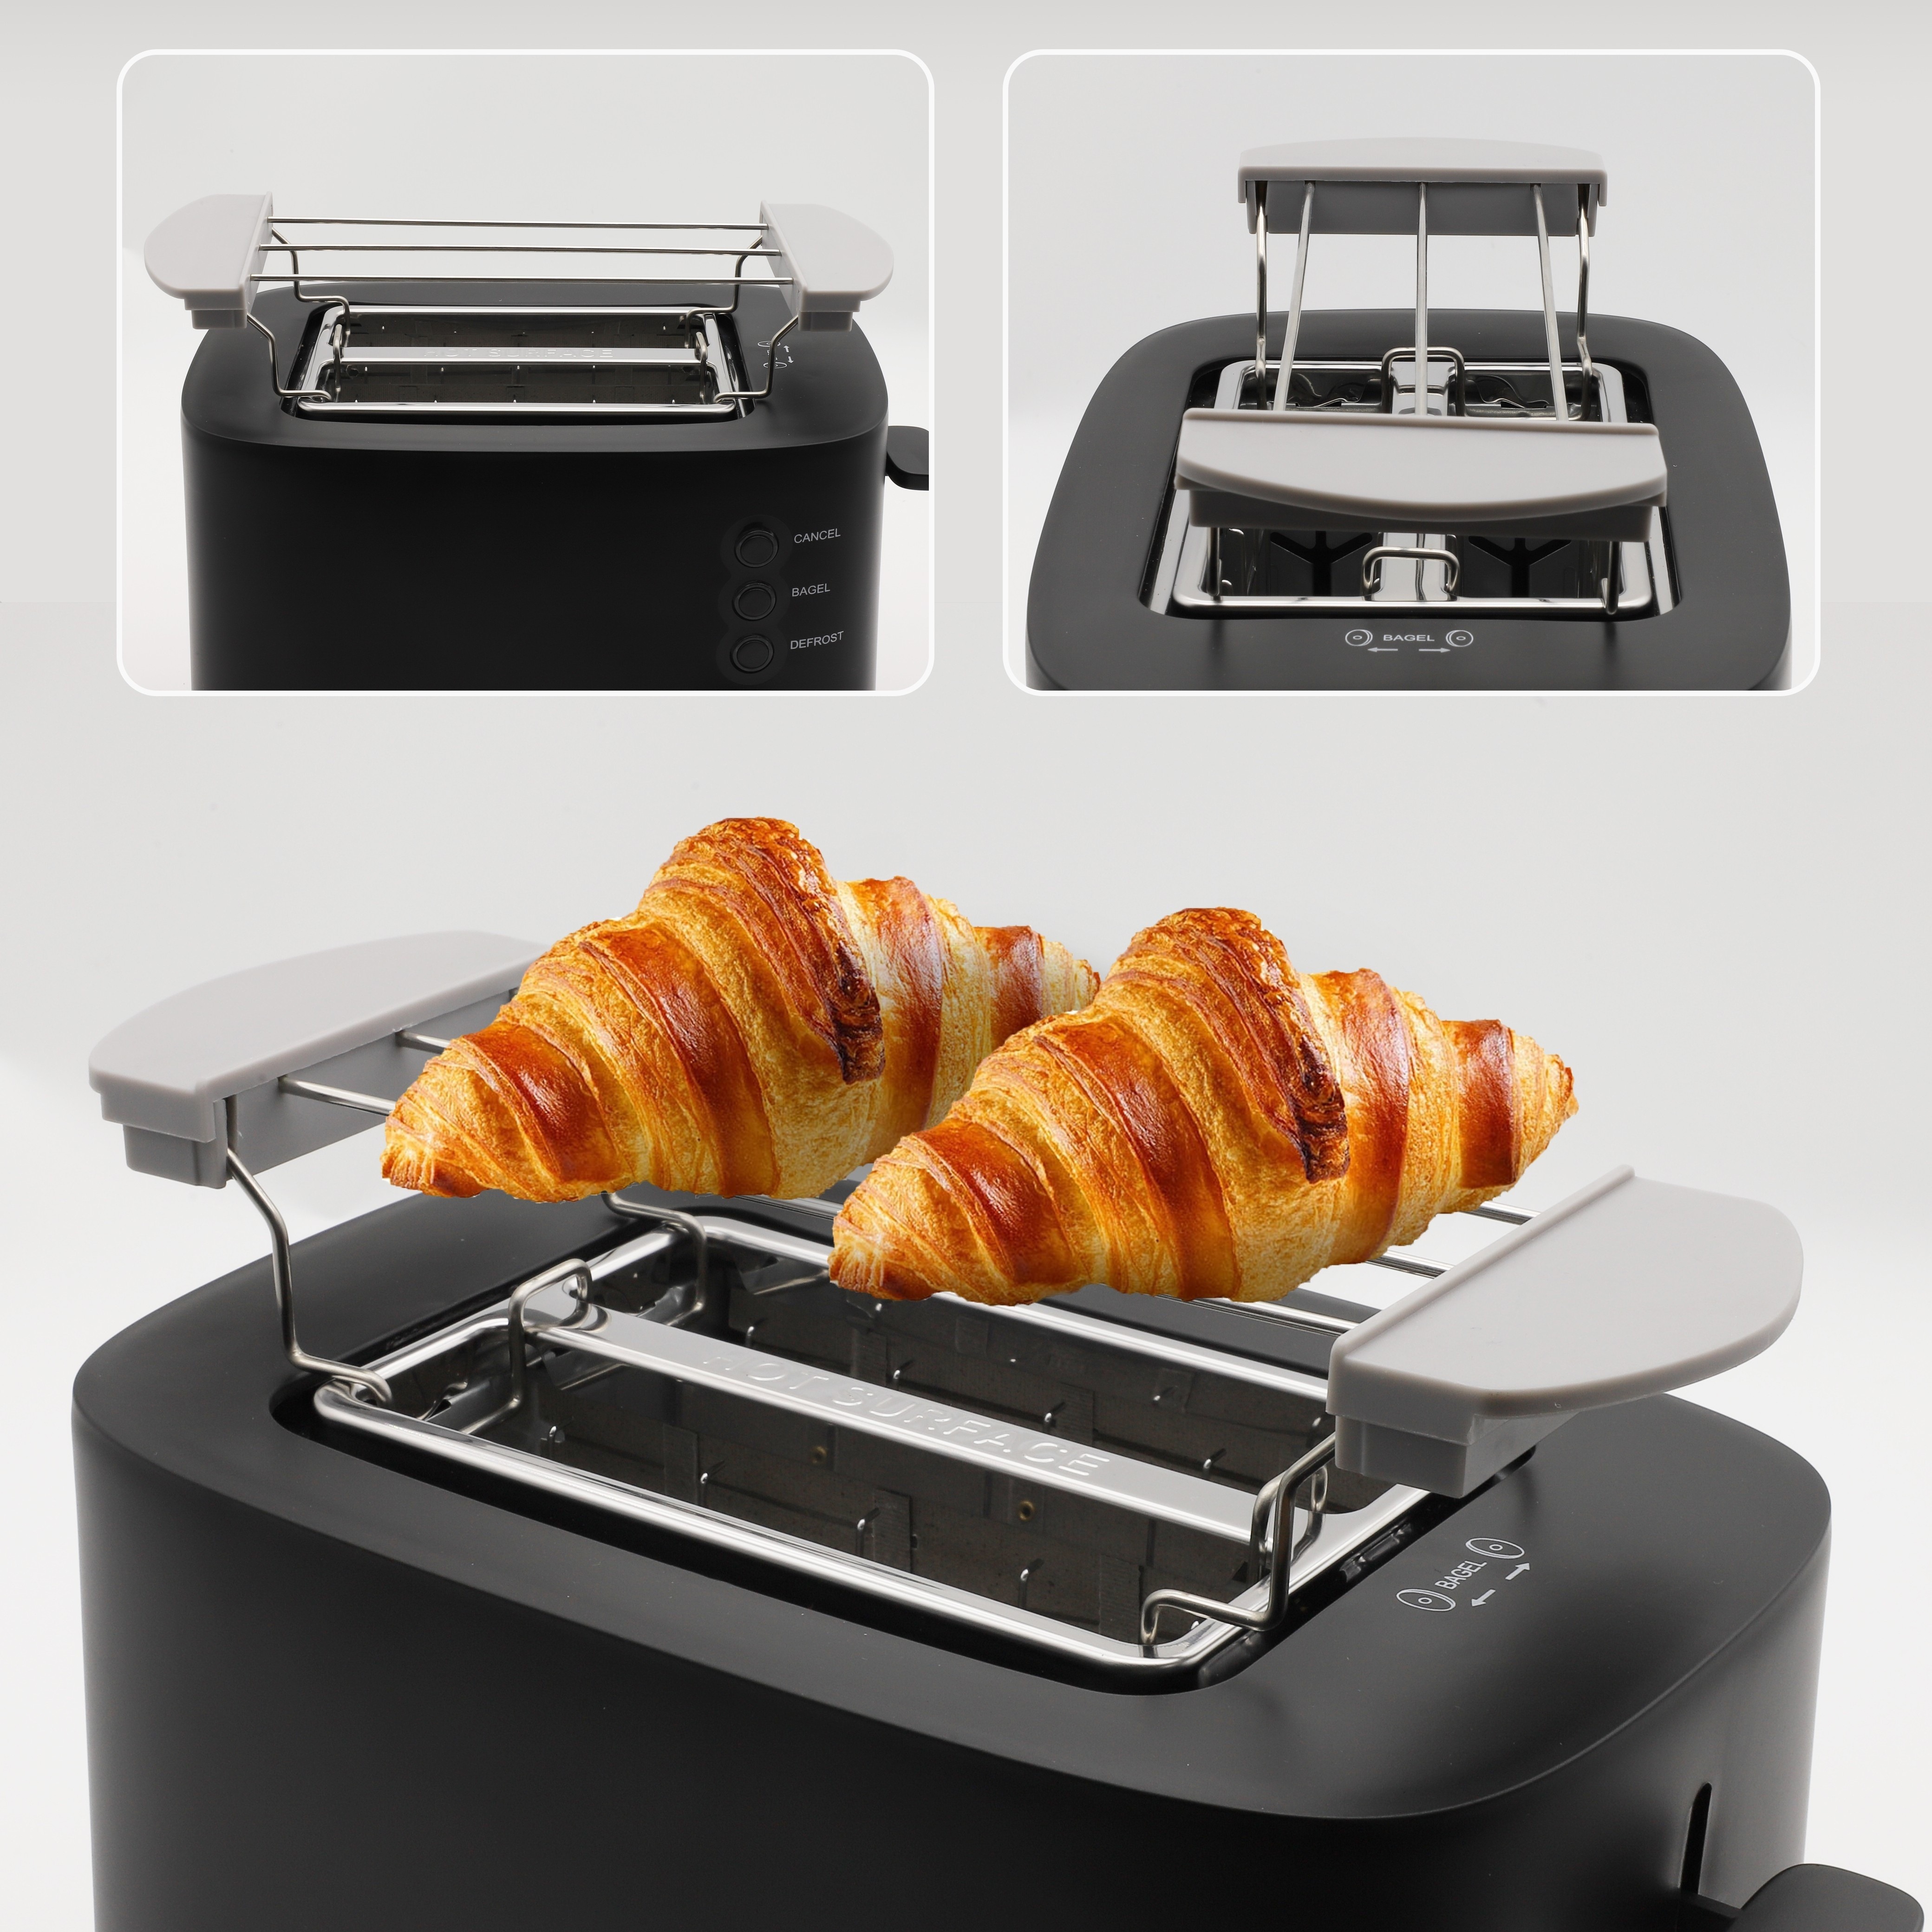 1pcFoldable Bun Warmer For Toaster,Foldable Bread Warming Rack For  Toaster,toaster Bread Baking Rack,toaster Bread Heating Rack,toaster Bread  Grill,To